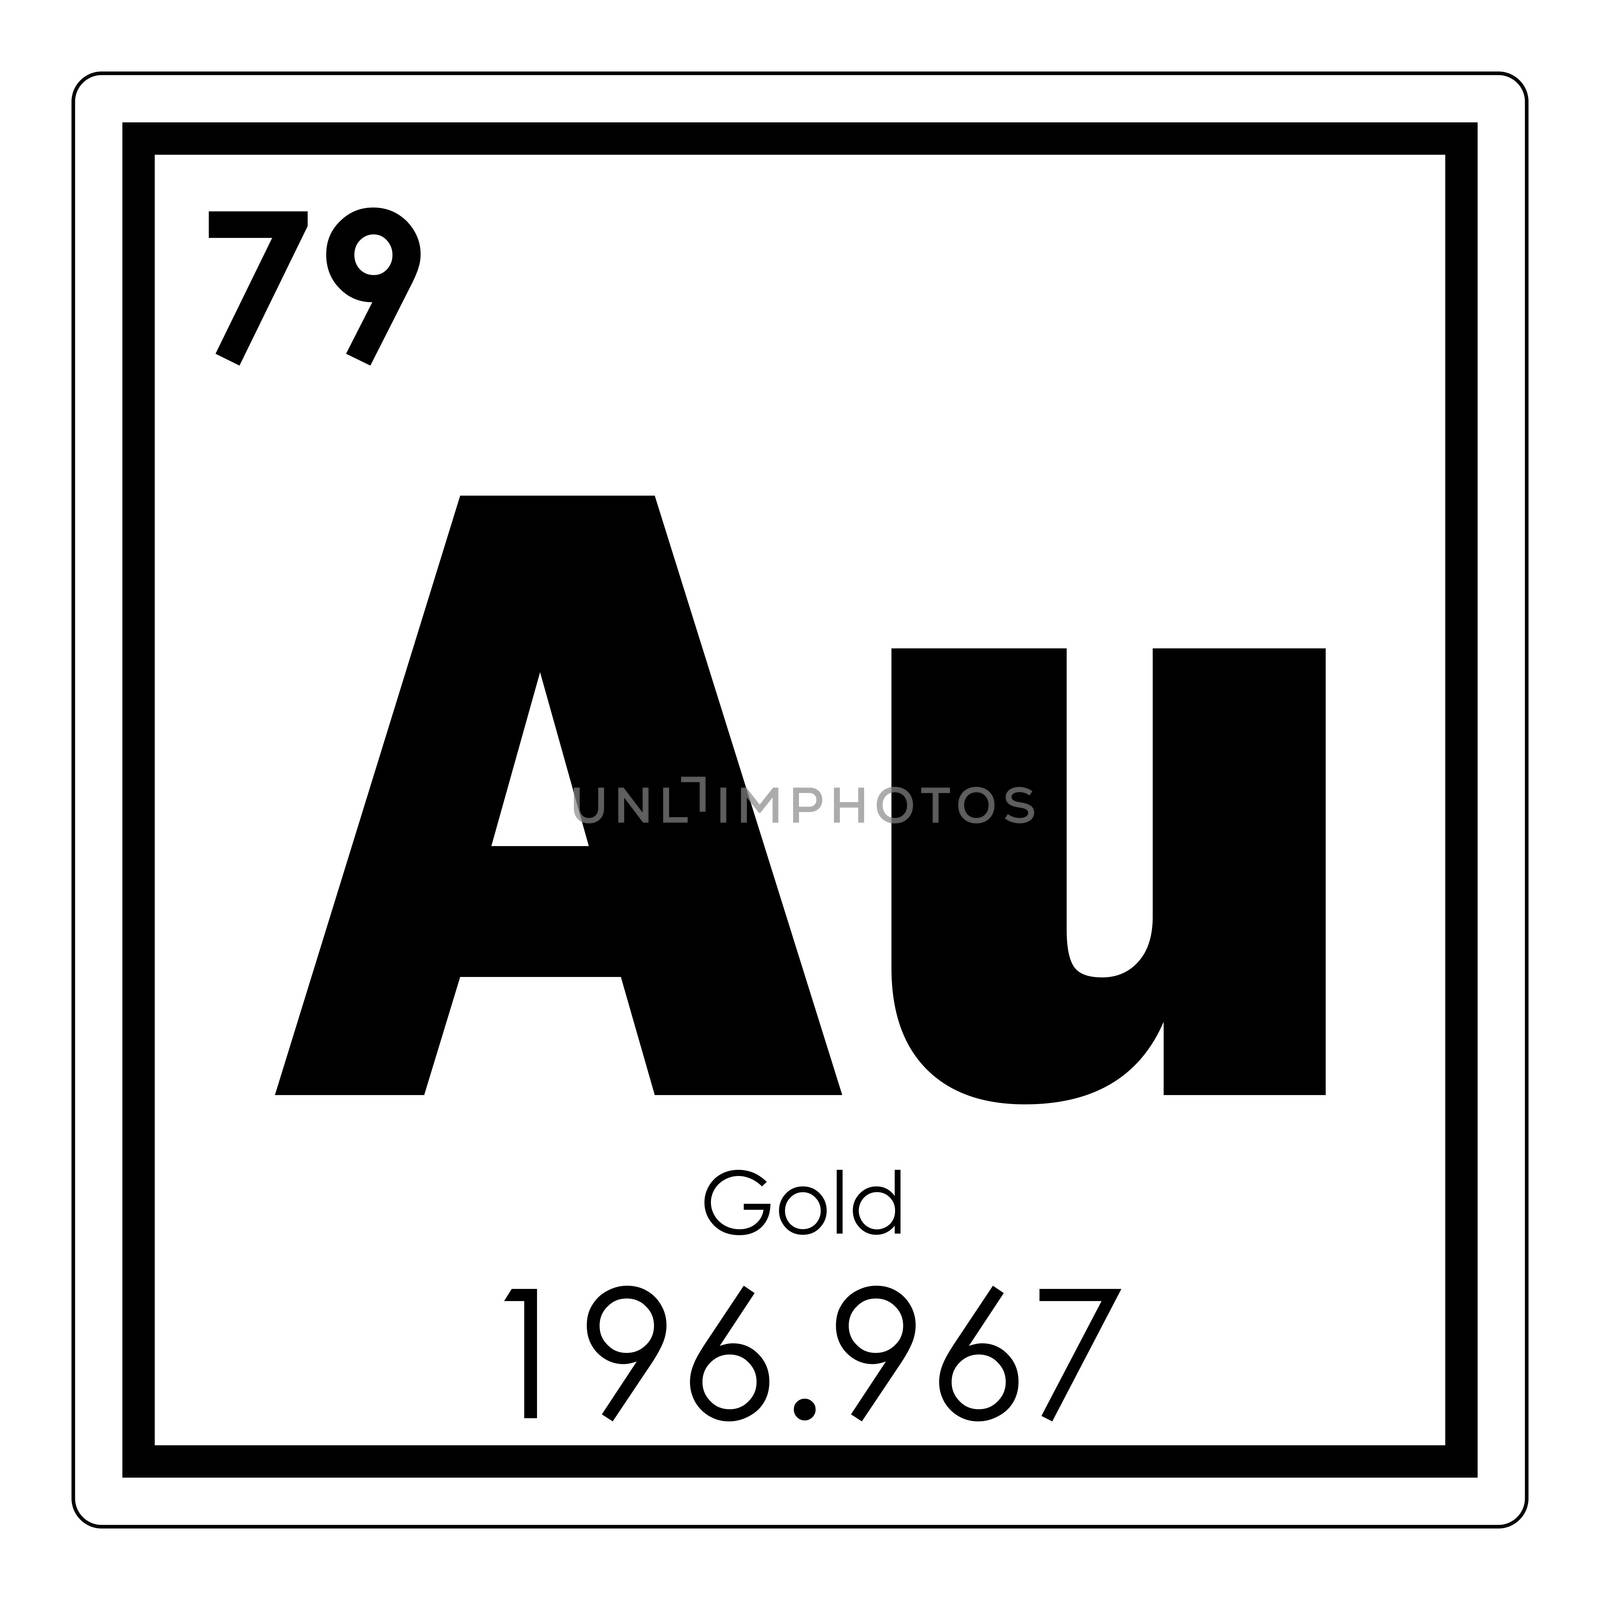 Gold chemical element by tony4urban